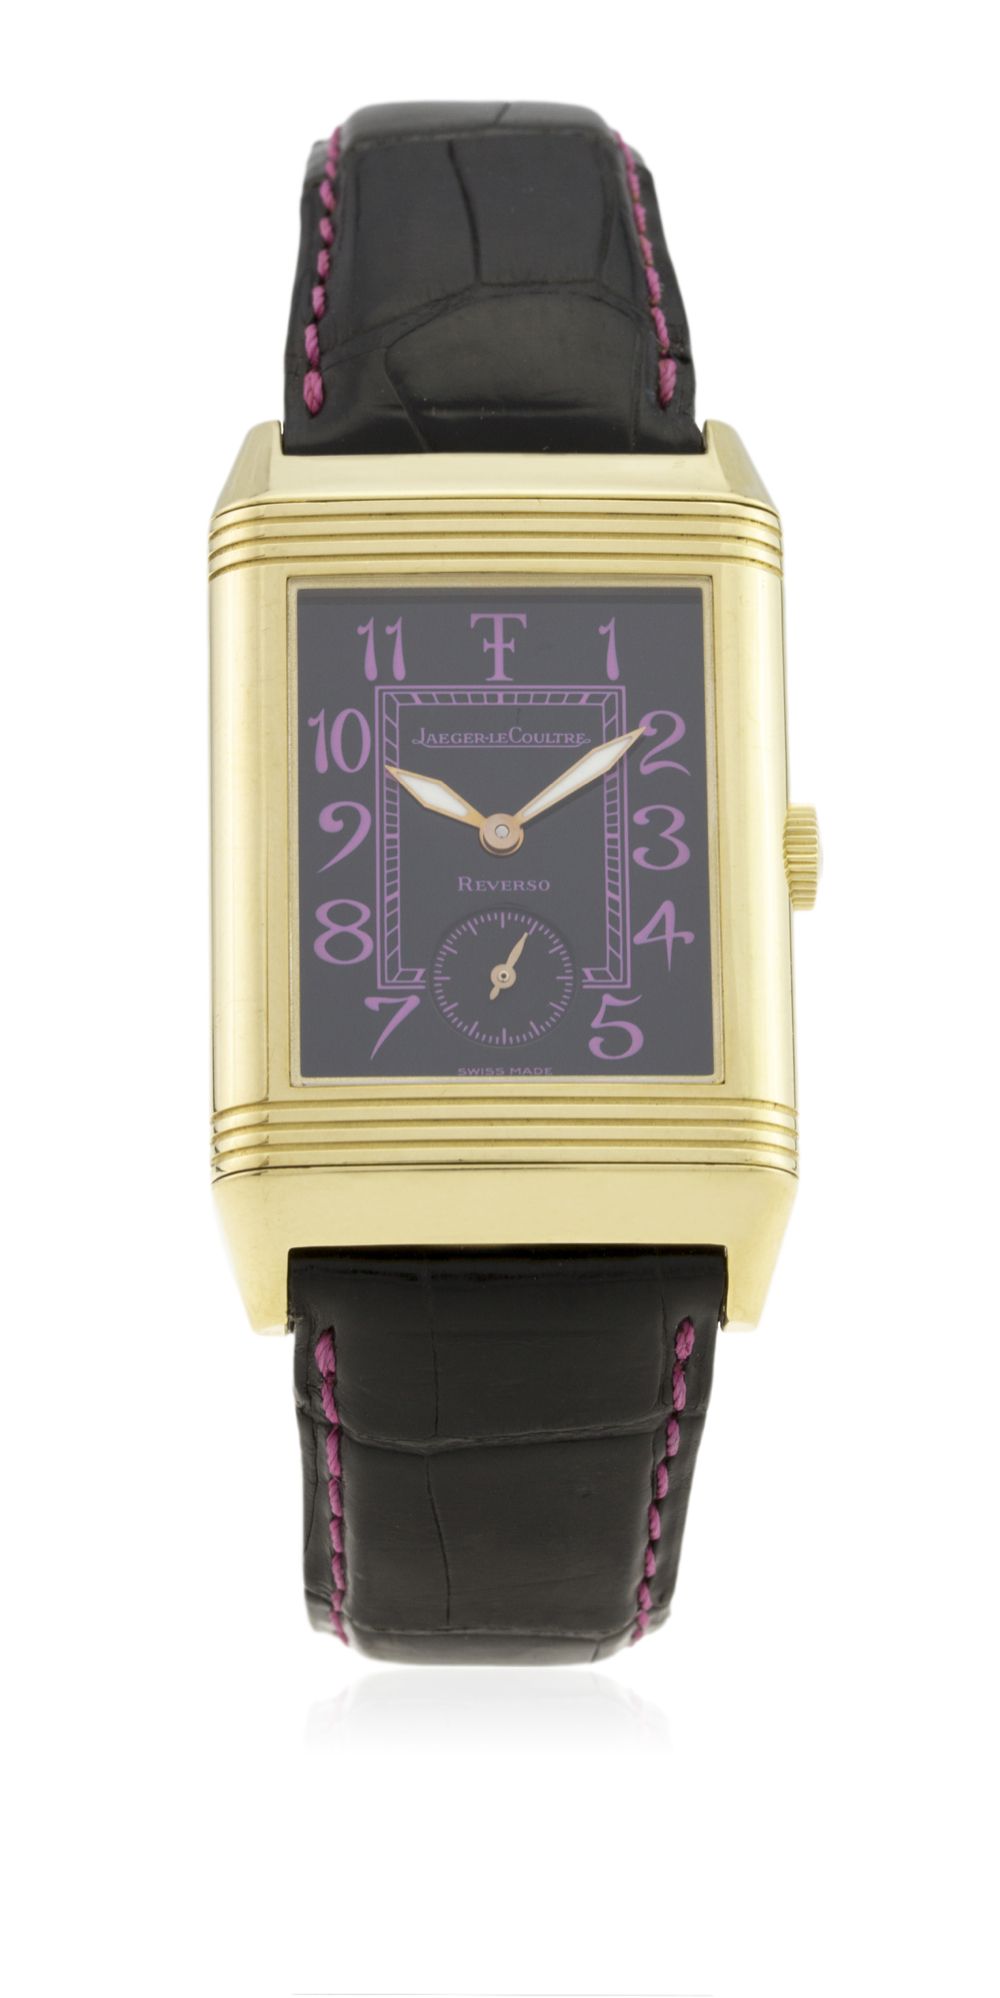 A RARE GENTLEMAN'S SIZE 18K SOLID GOLD JAEGER LECOULTRE GRANDE TAILLE REVERSO WRIST WATCH CIRCA